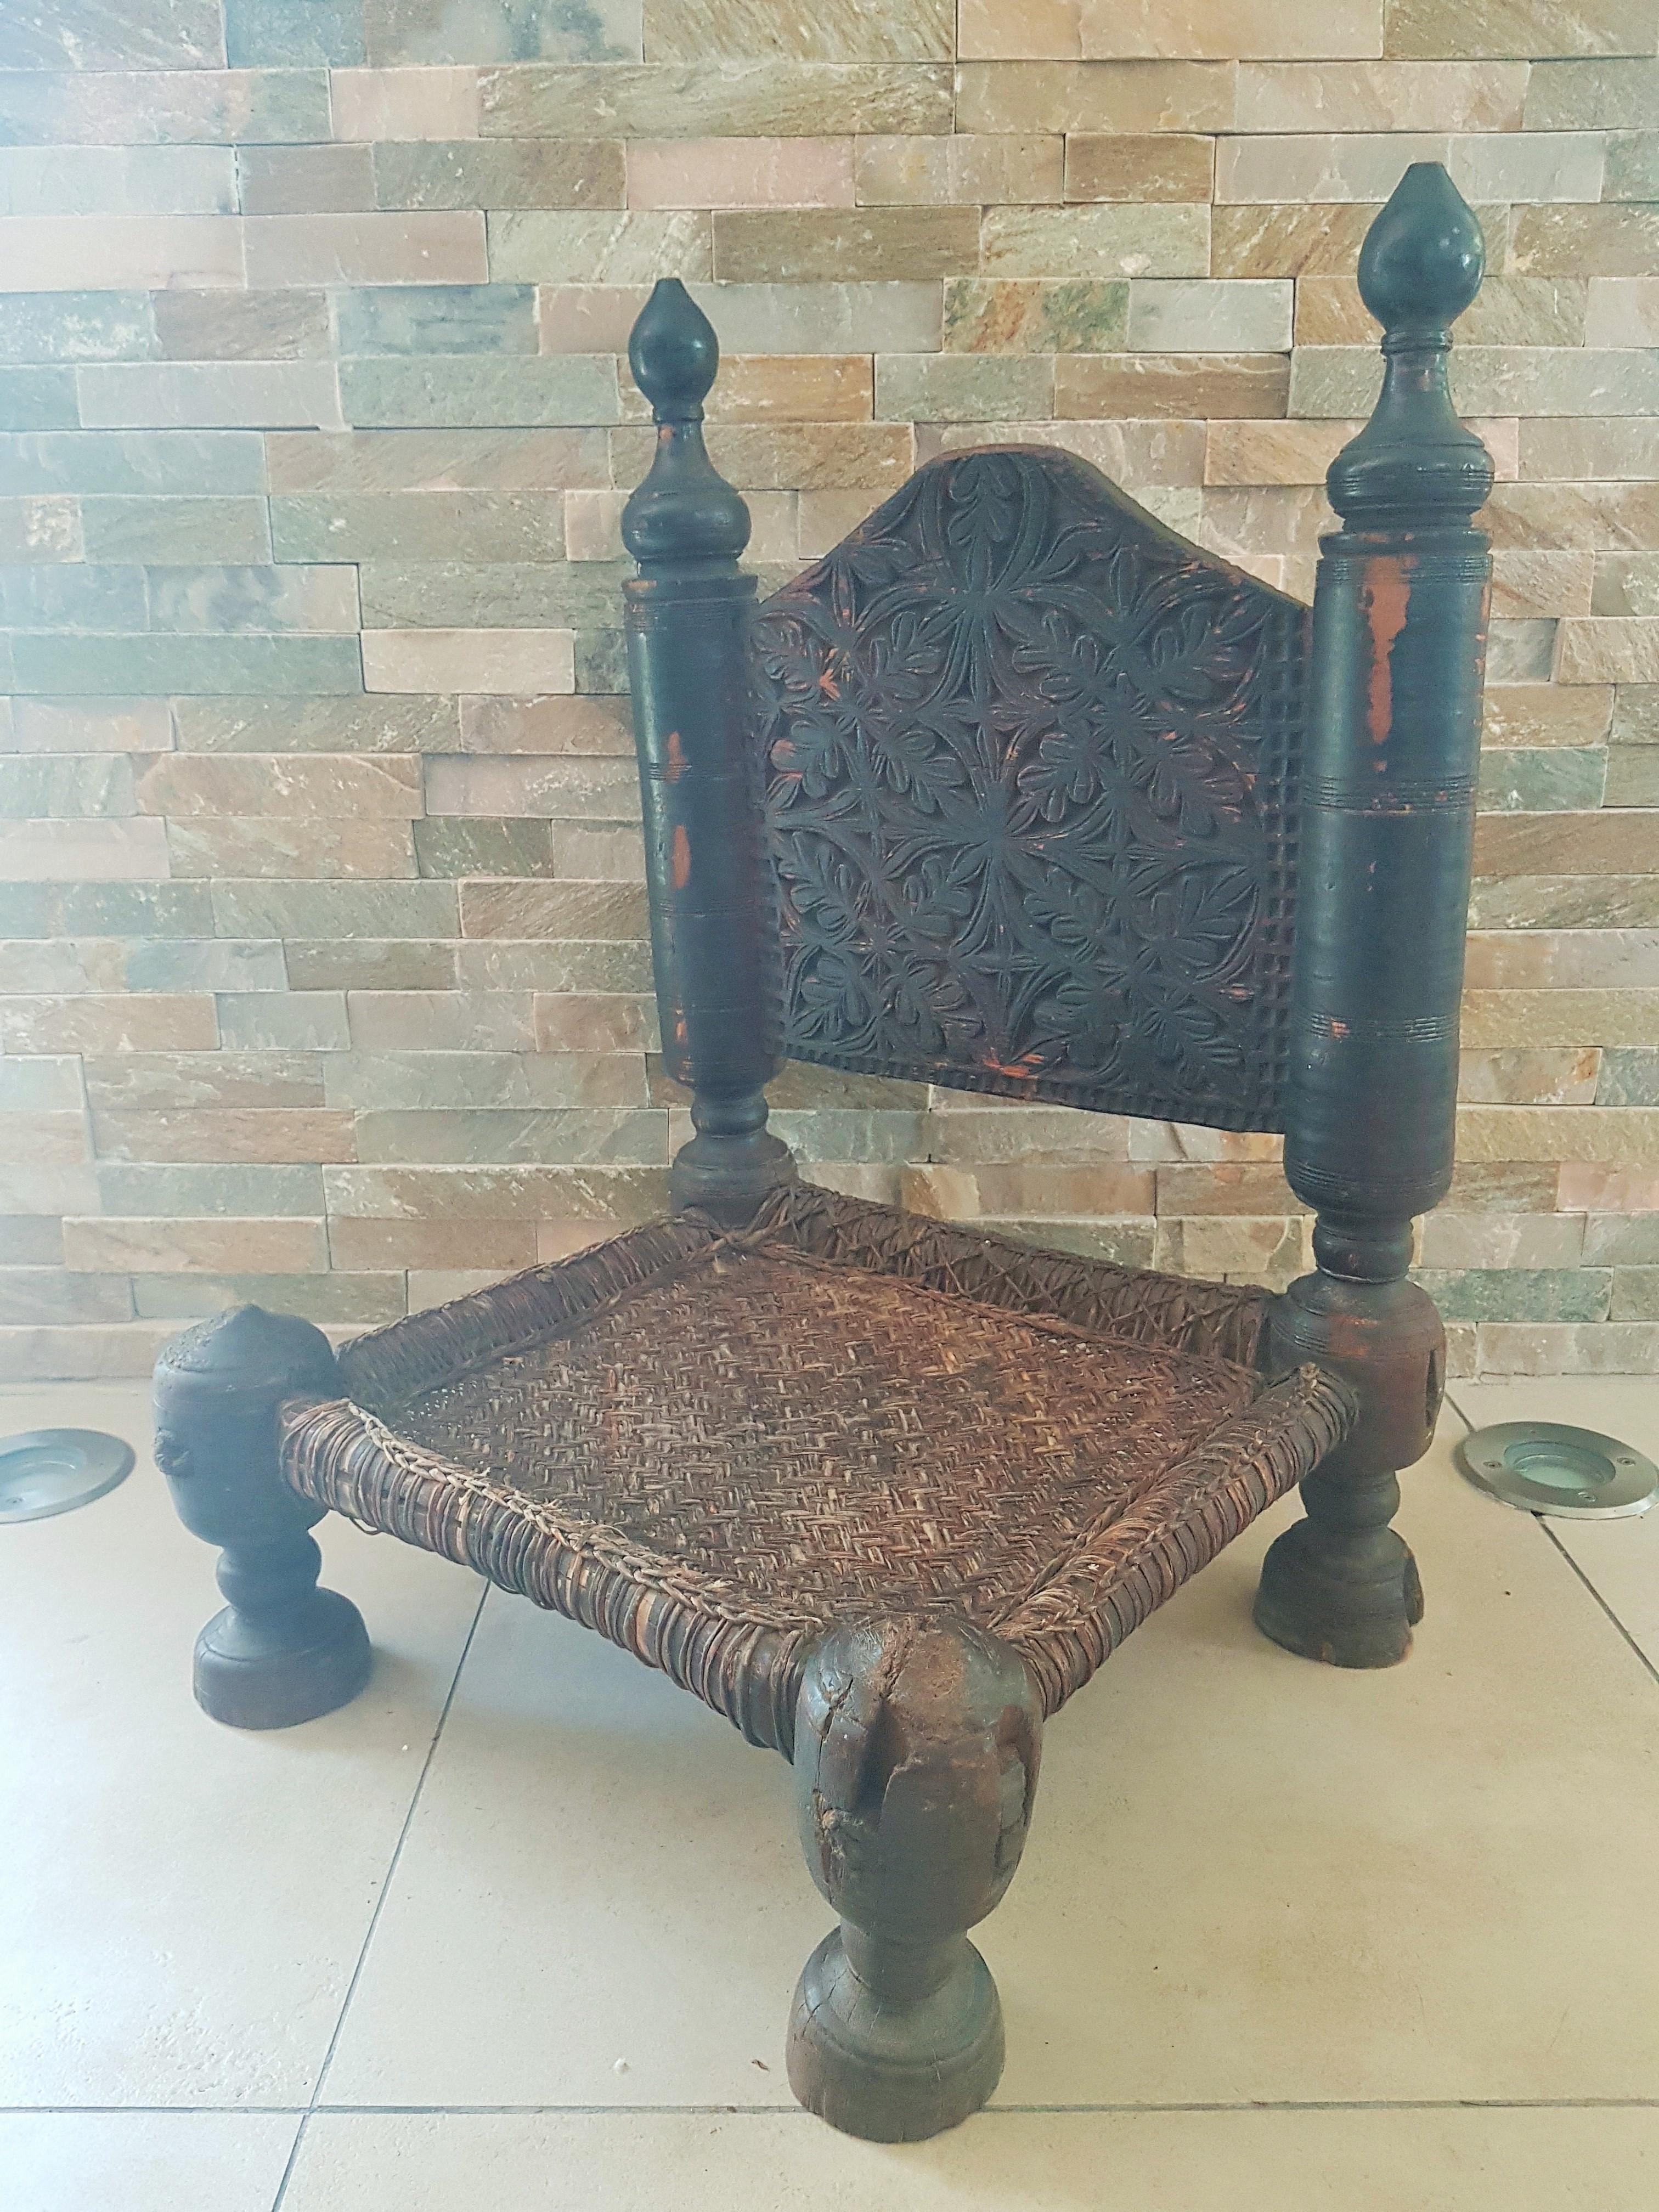 An antique Asian rustic low chair from the 19th century, most likely from burma.

carved seat back with handwoven seat presenting a lovely weathered appearance. still in a stabile condition!

great decorative accent for minimal interiors!
 